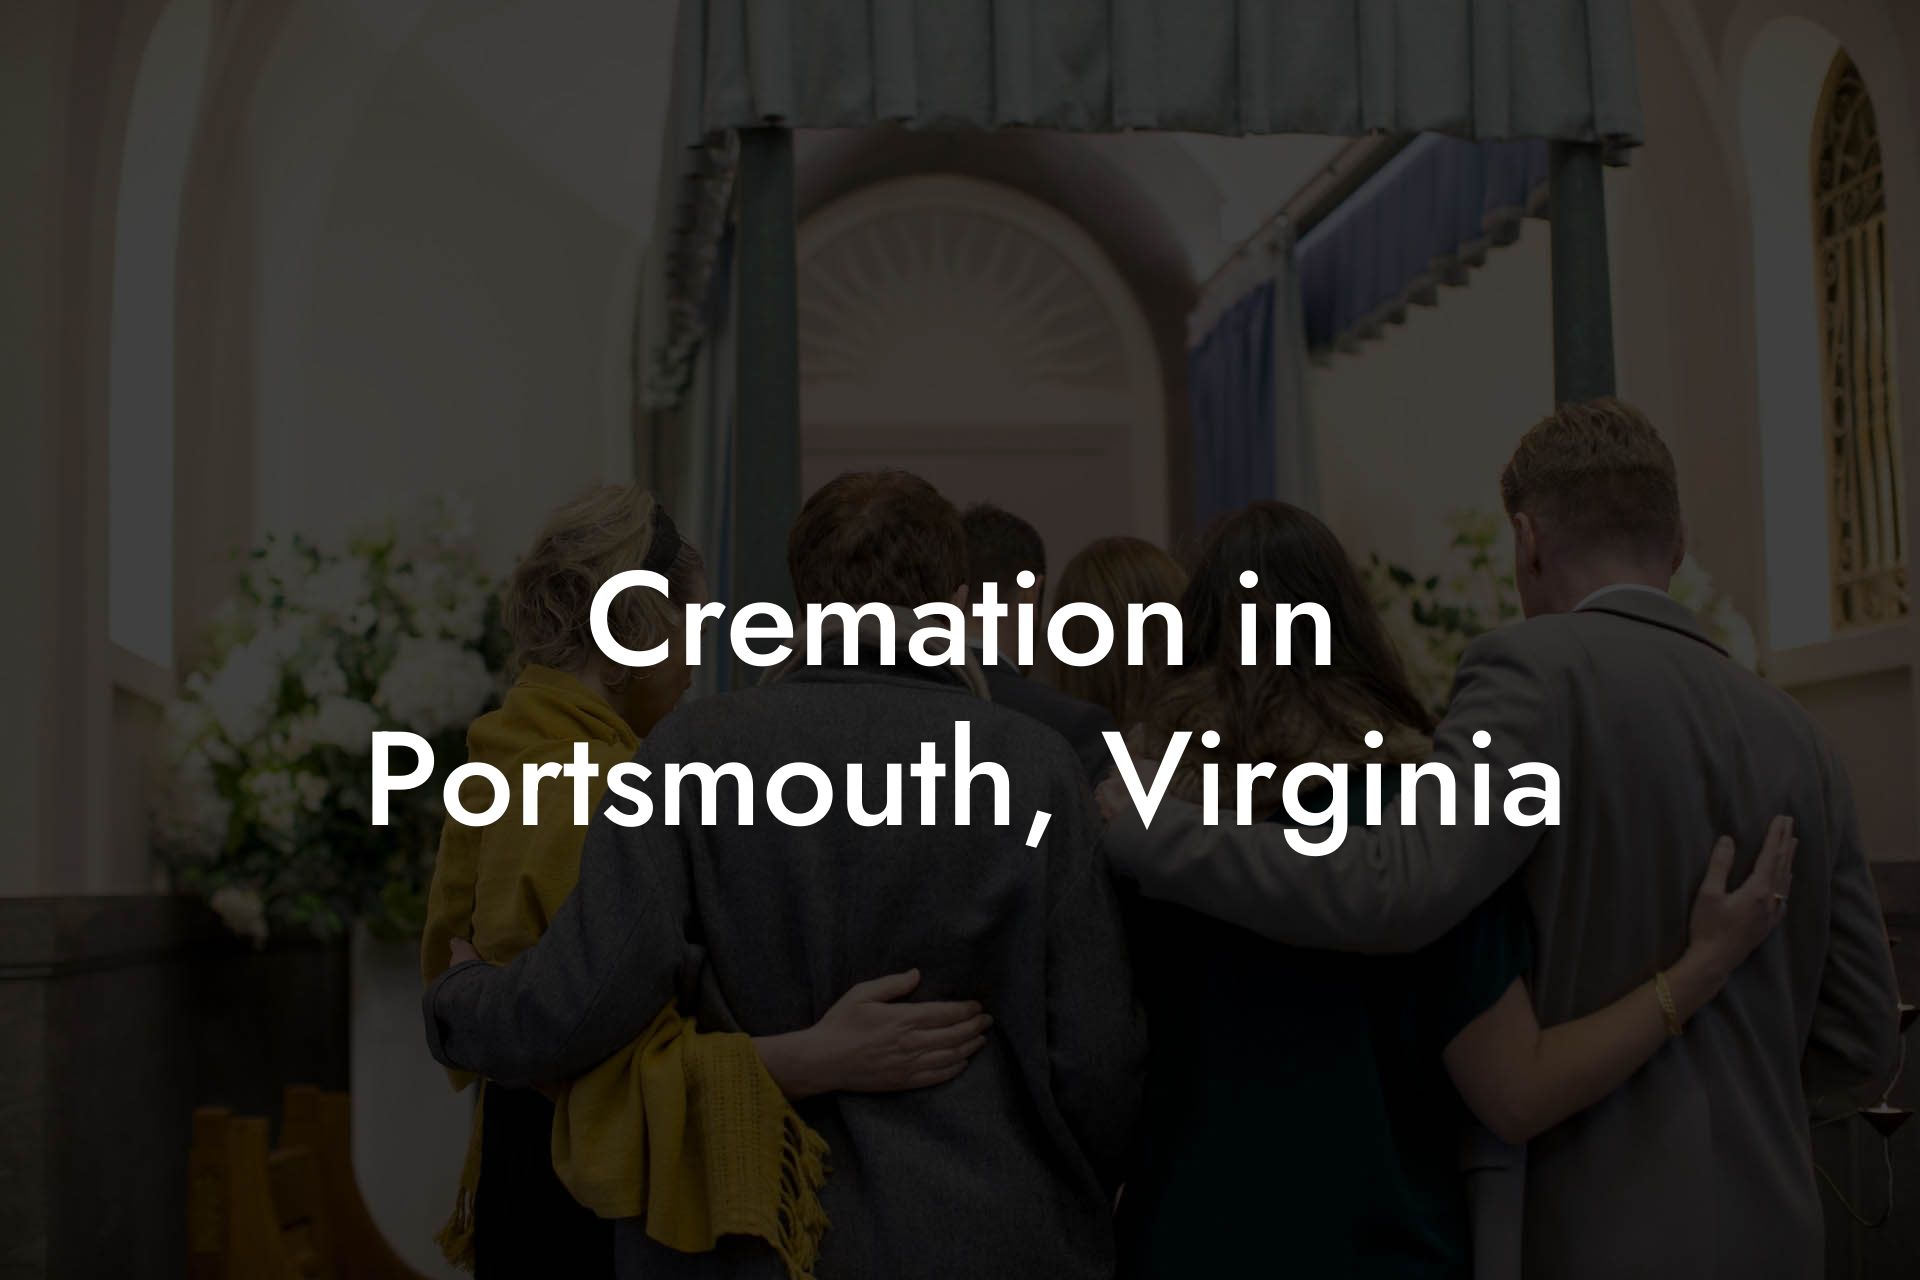 Cremation in Portsmouth, Virginia